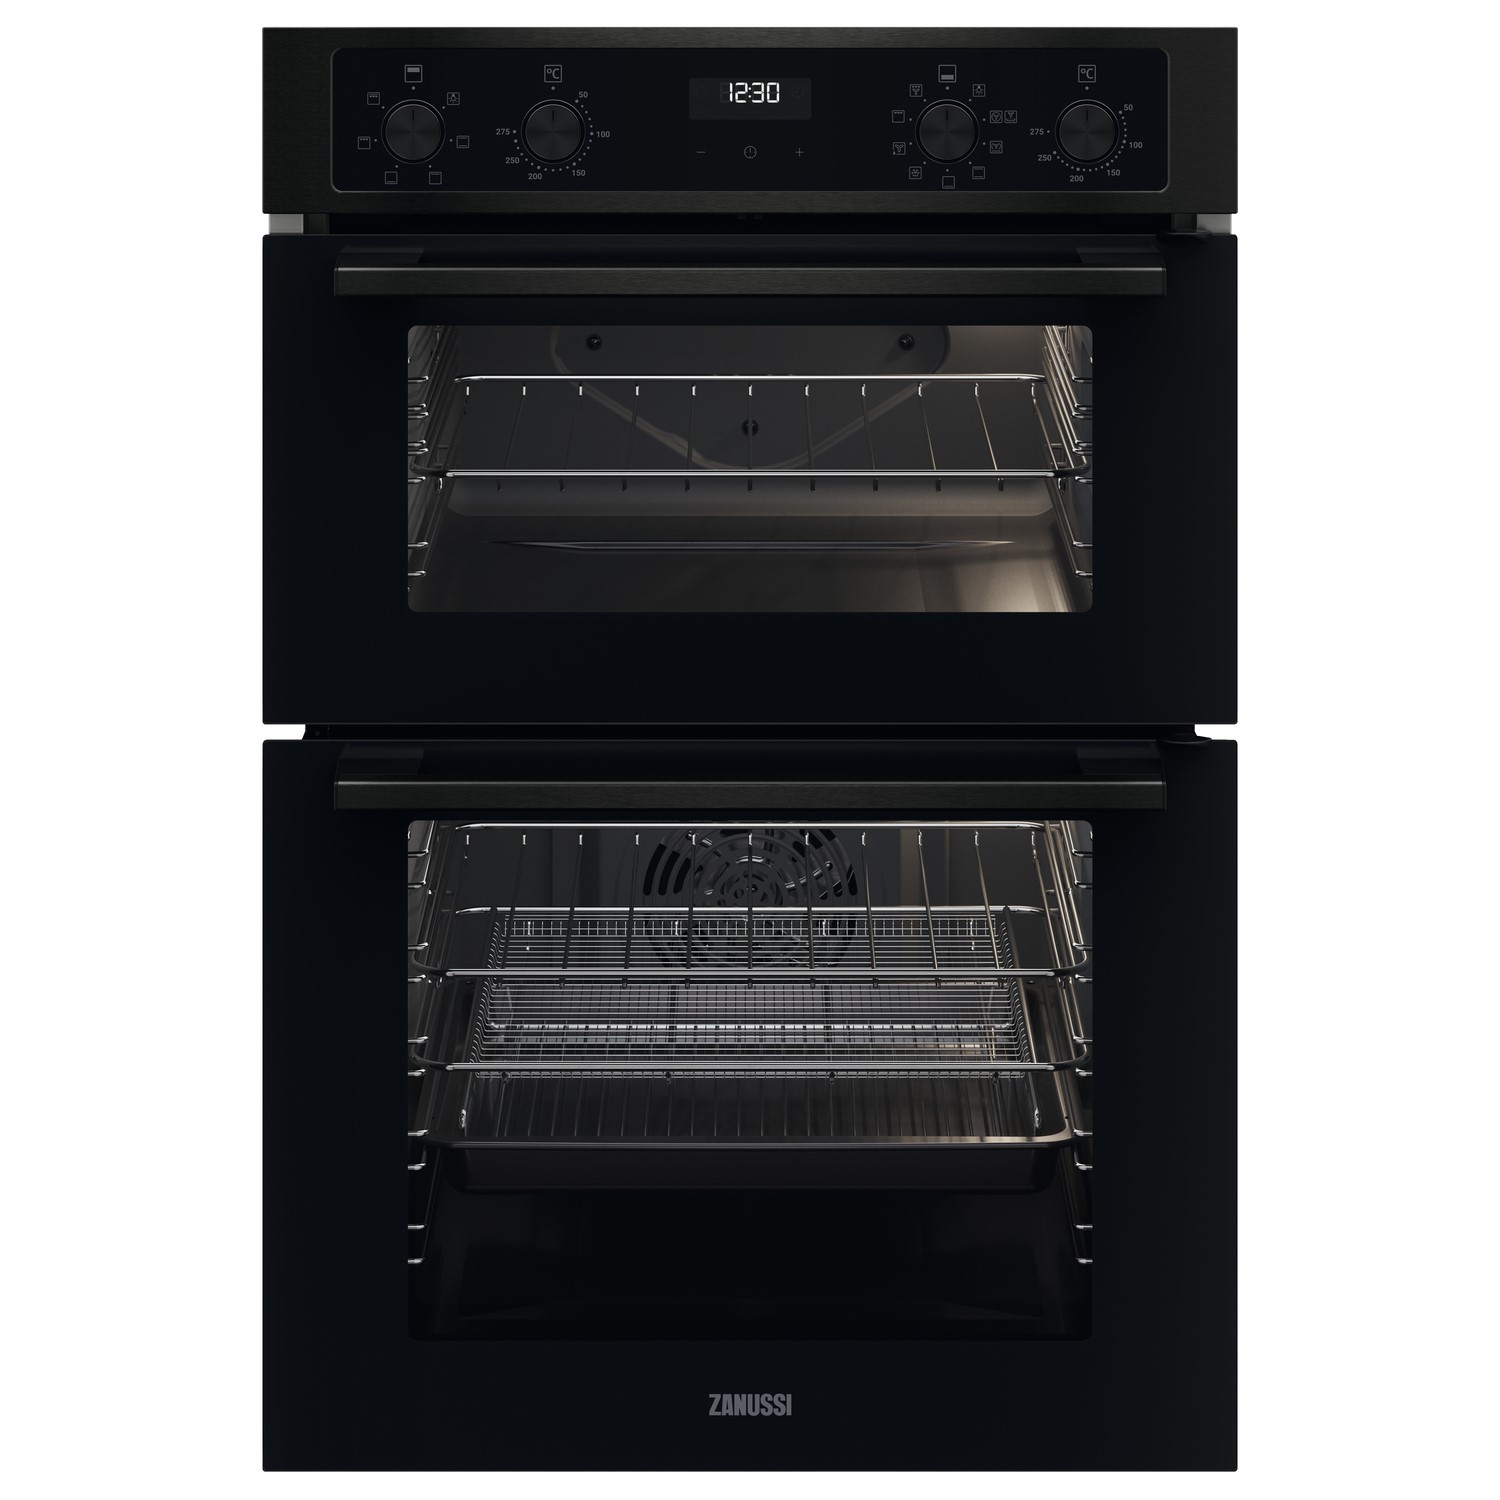 Refurbished Zanussi Series 20 ZKCNA4K1 60cm Double Built In Electric Oven with Catalytic Cleaning Bl